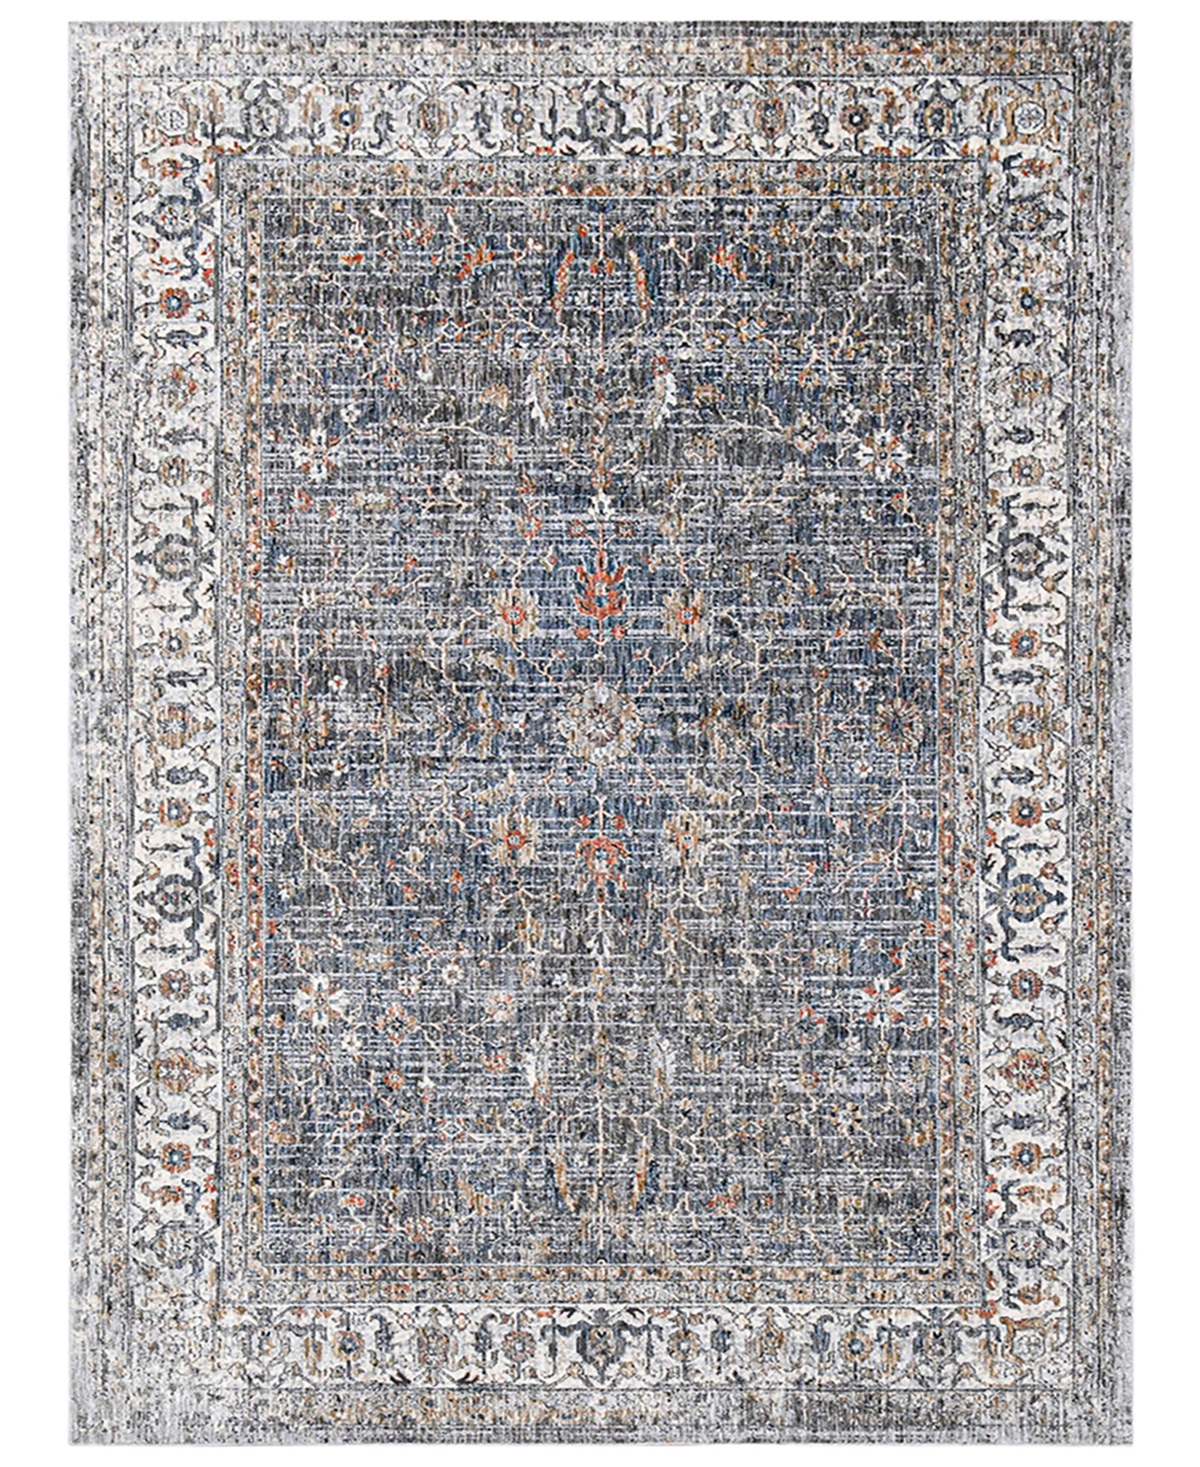 AMER RUGS VERMONT GLIDEL 7'10" X 9'10" AREA RUG